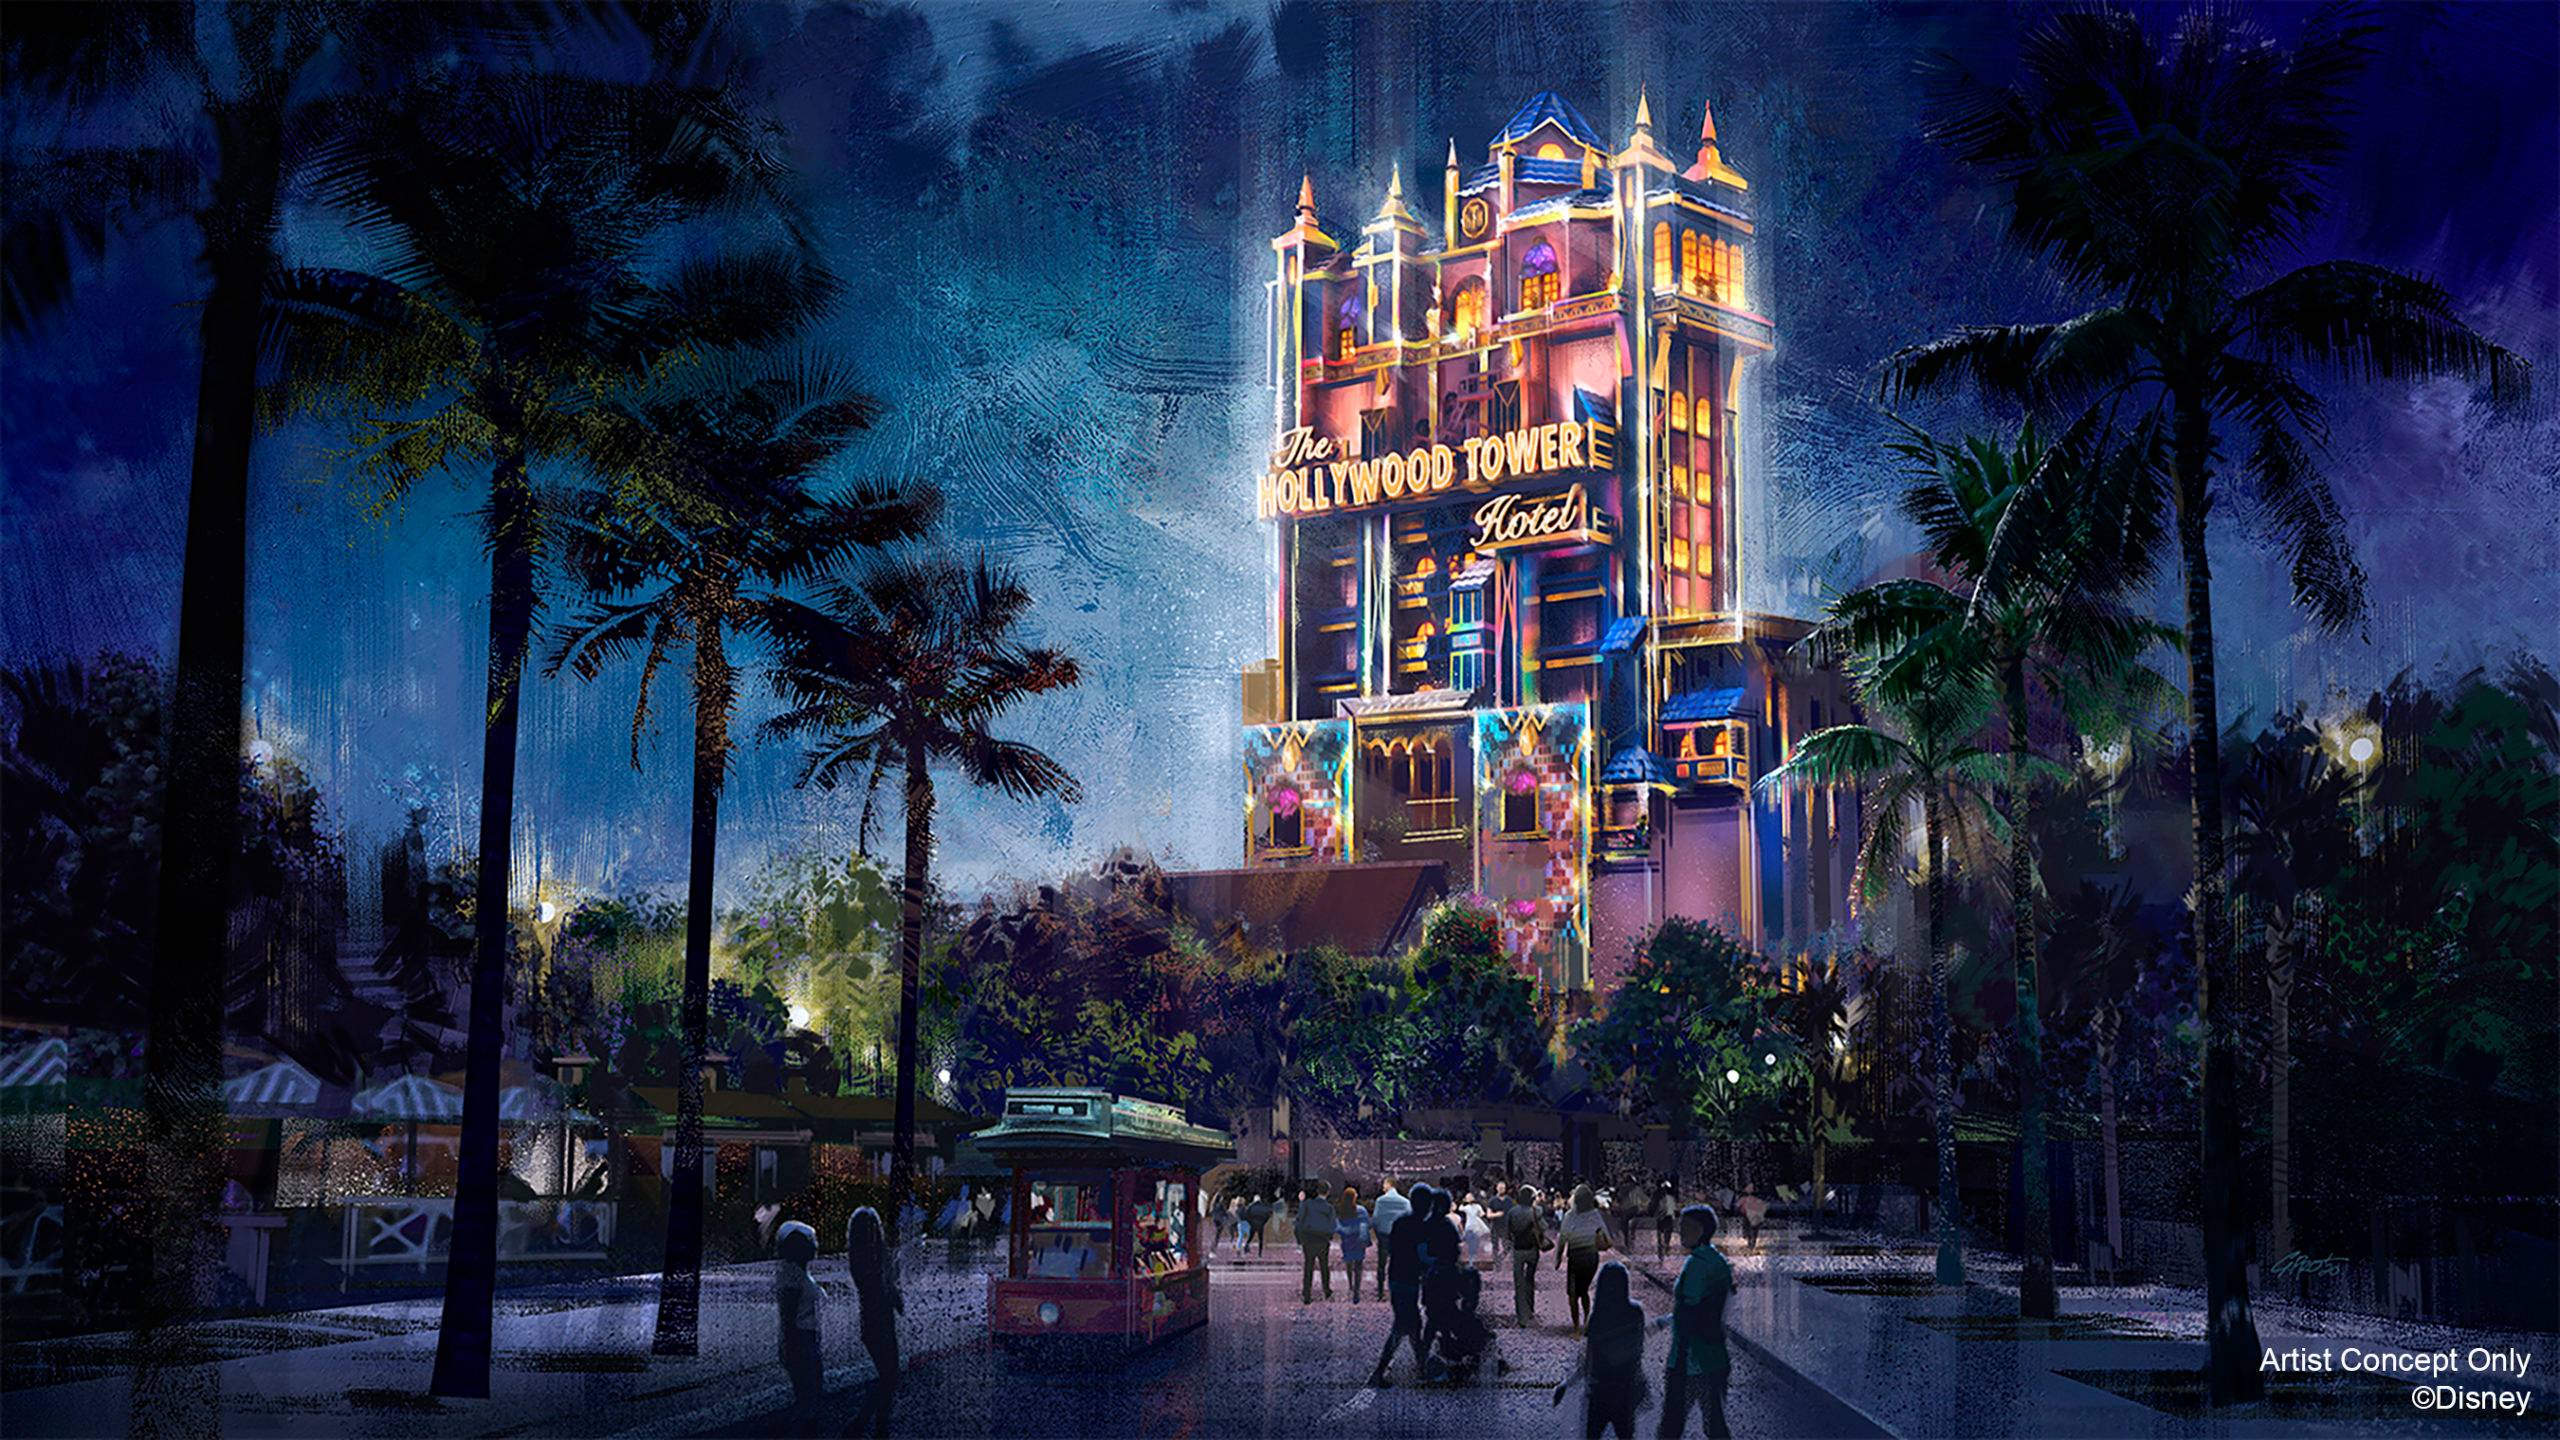 Hollywood Tower Hotel becomes a Beacon of Magic in Disney’s Hollywood Studios